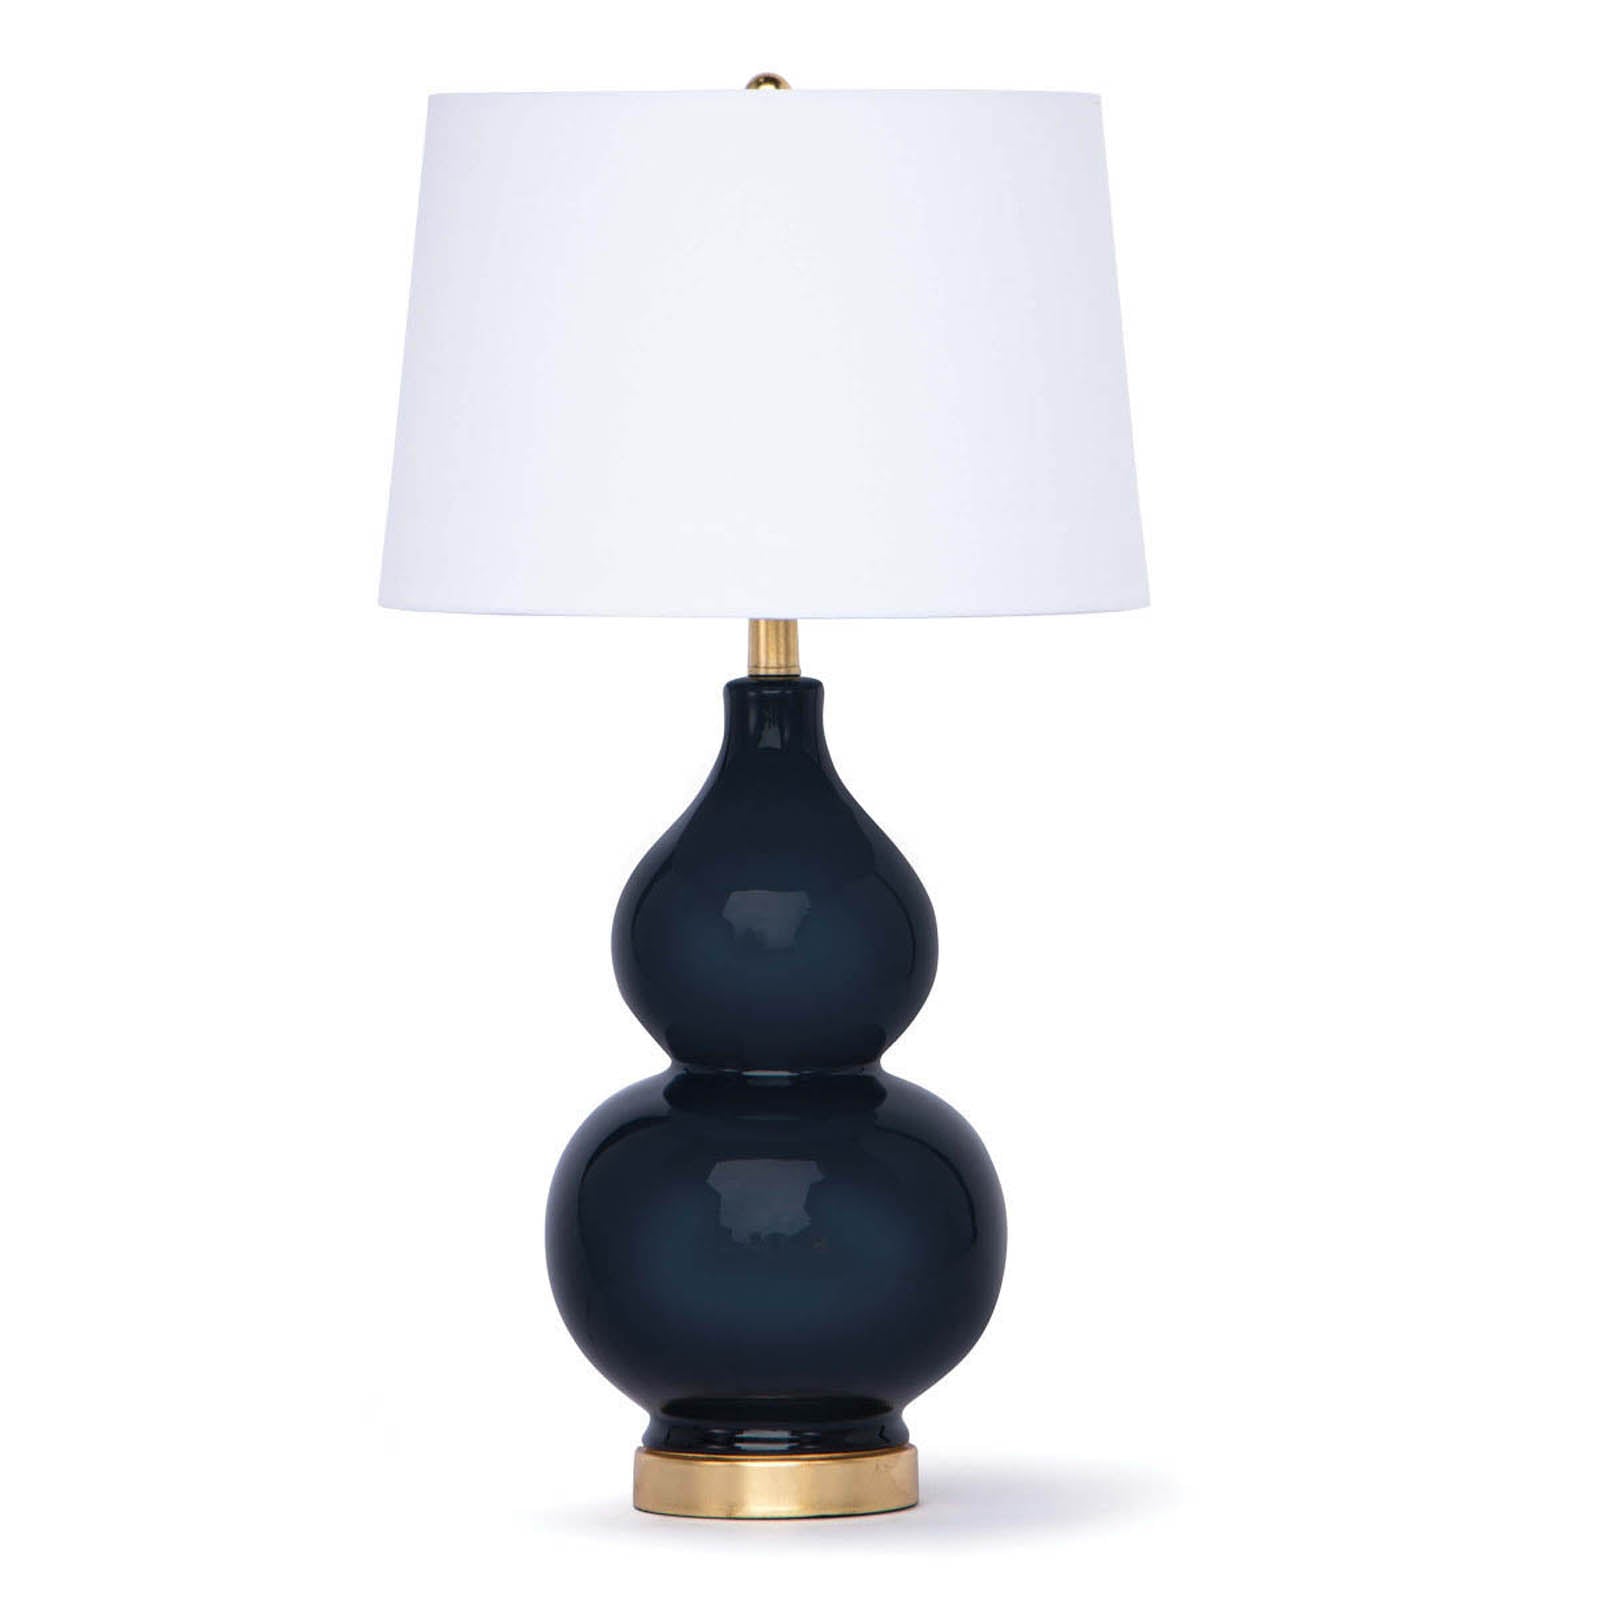 Madison Ceramic Table Lamp in Navy by Coastal Living